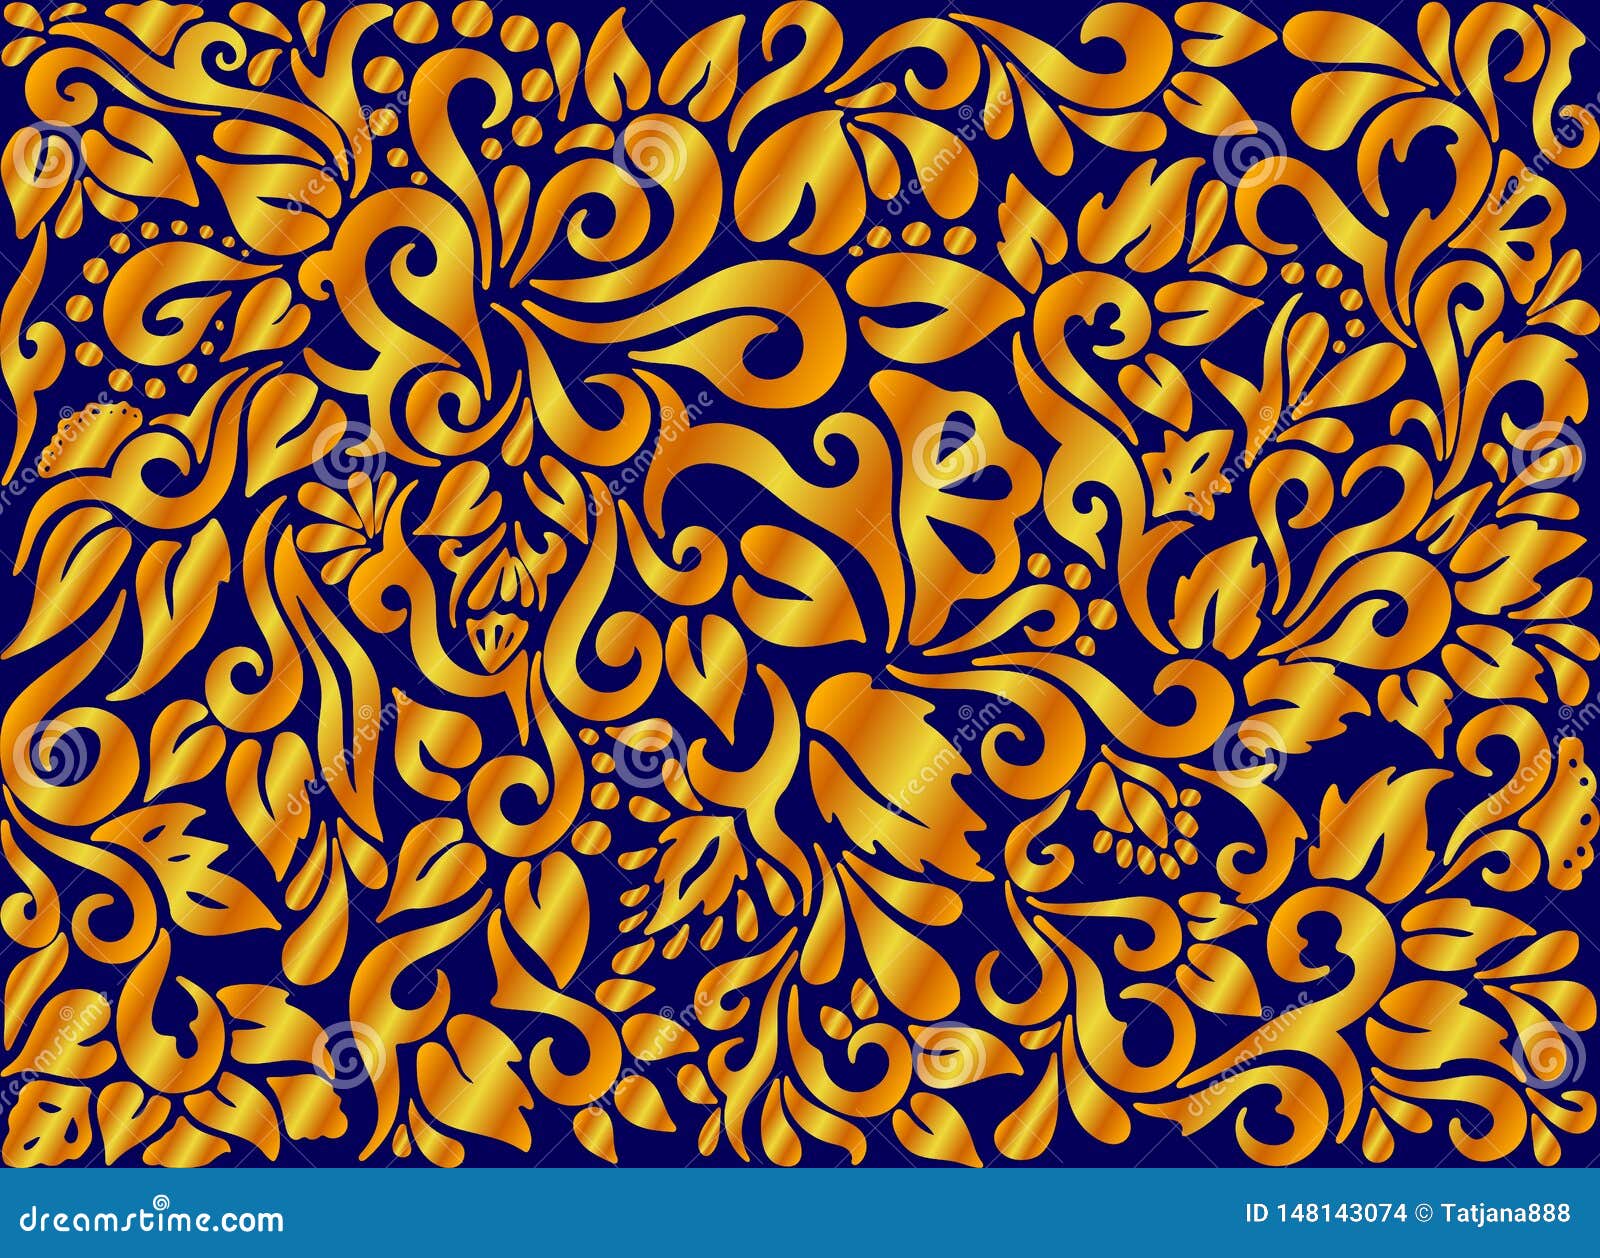 Hand Drawn Tribal Pattern with Golden Gradient on Blue Background ...